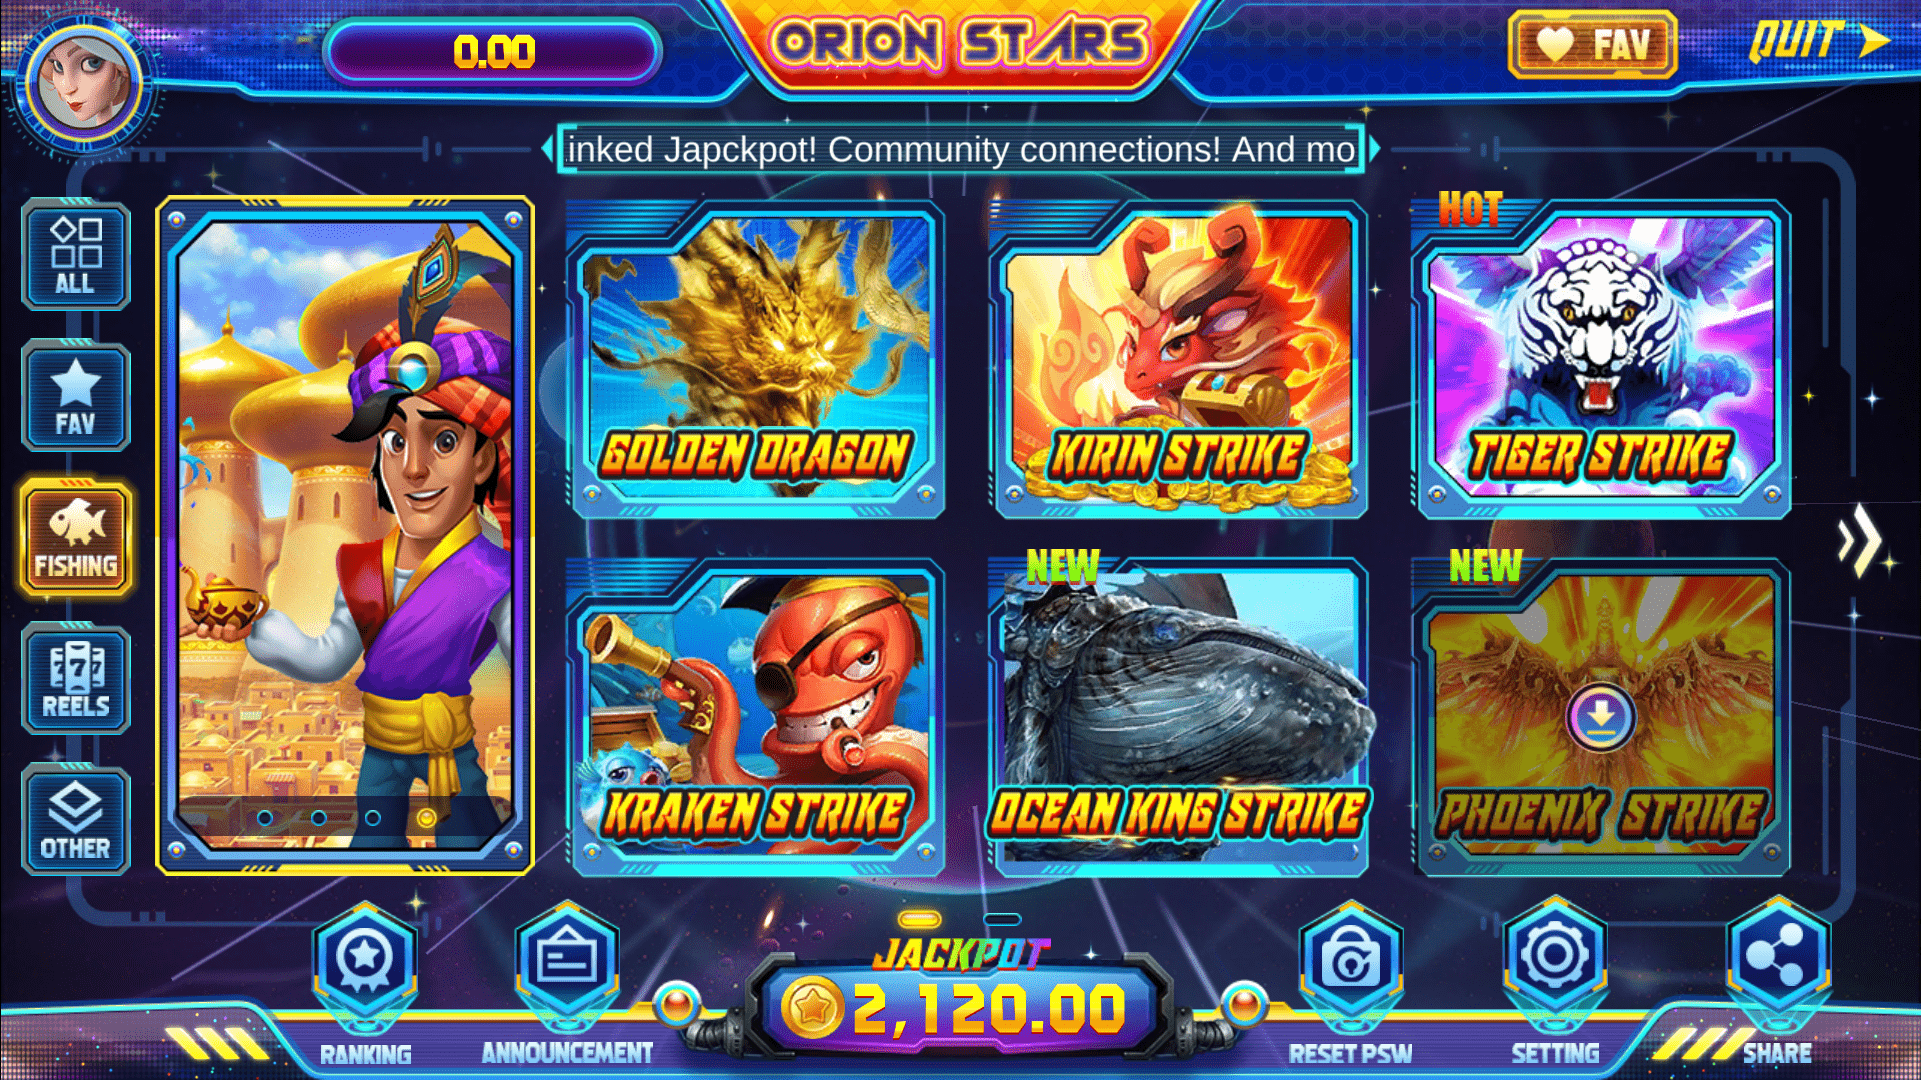 Orion Stars Games